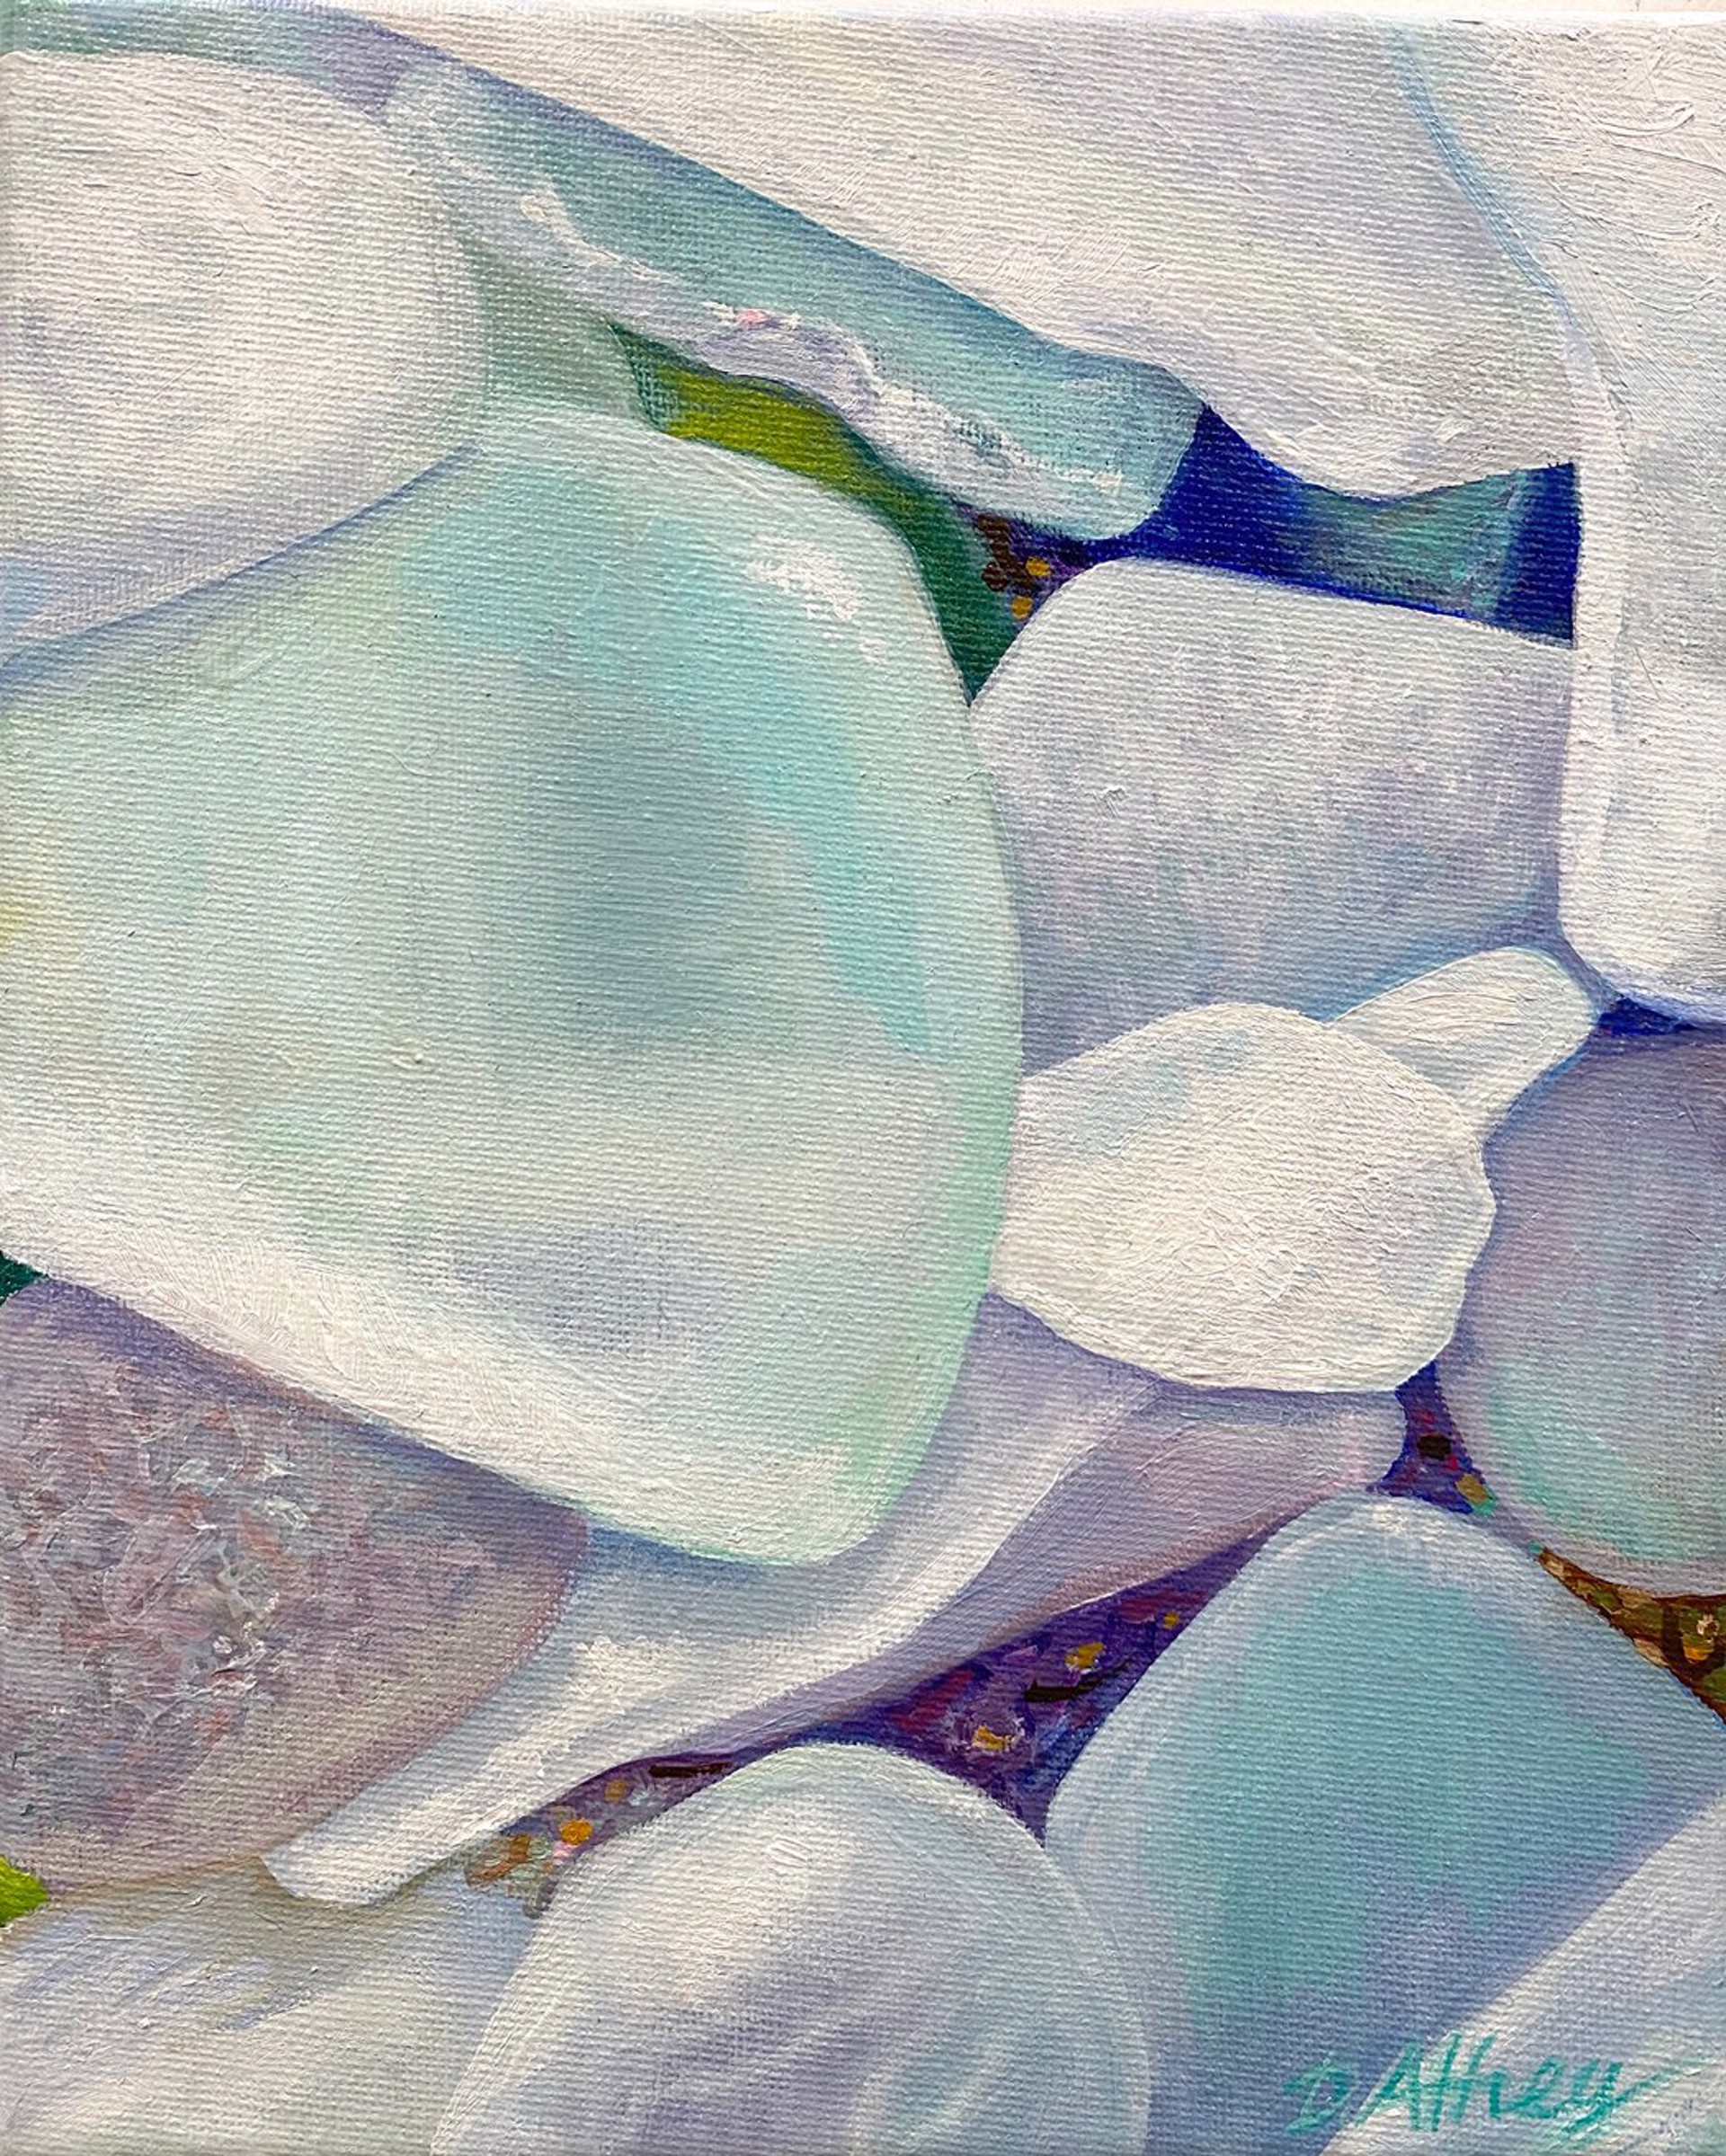 Seaglass No. 21 - Ariel by Dianne Athey